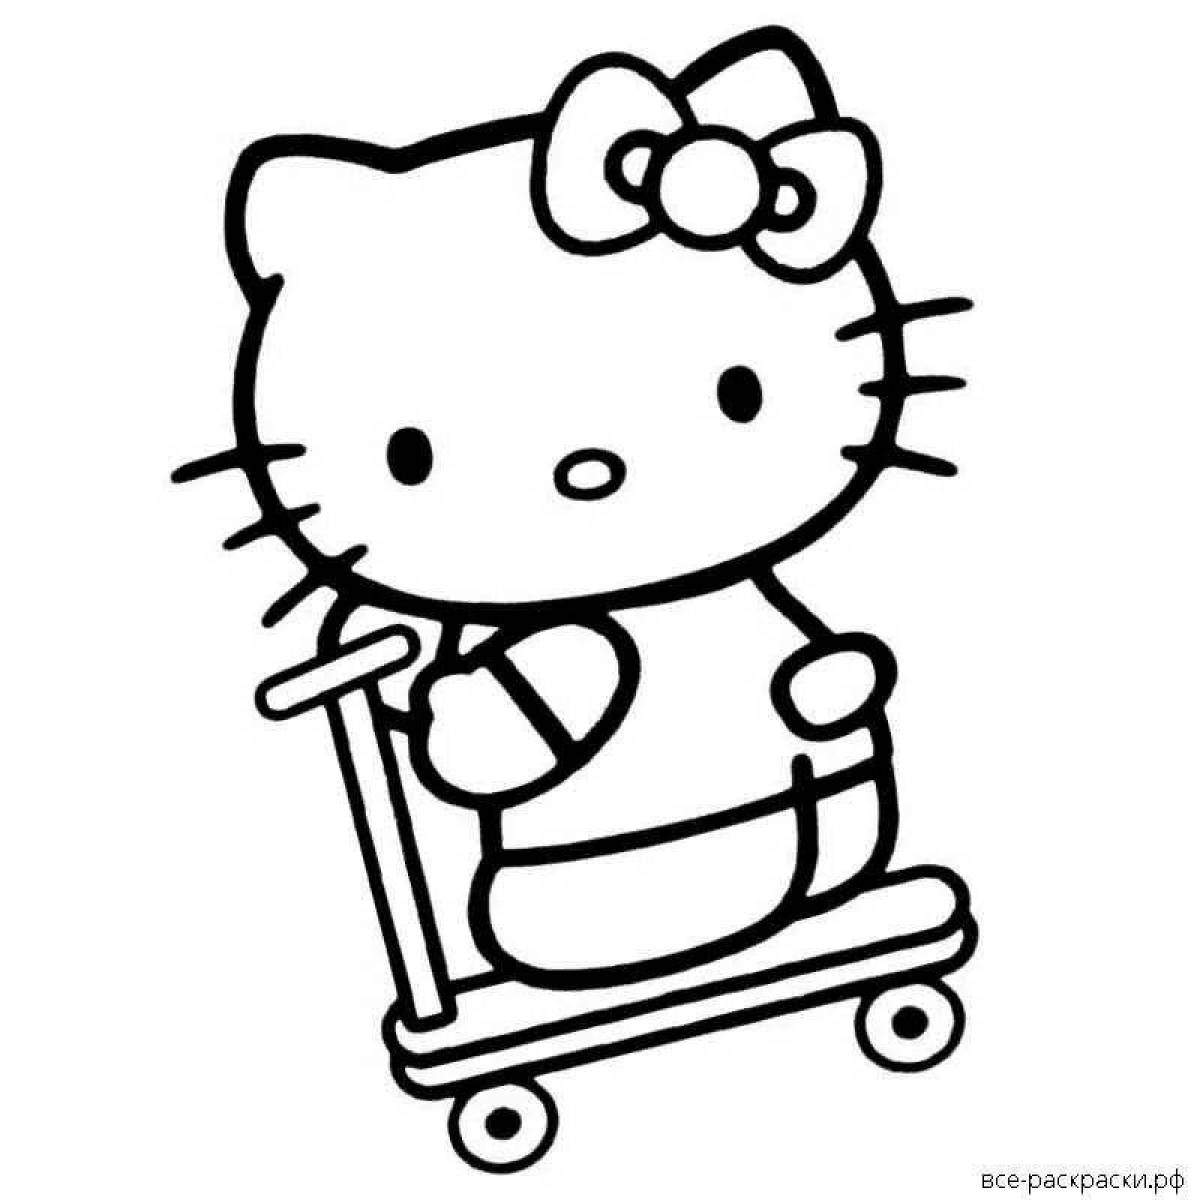 Attractive hello kitty coloring book in black and white